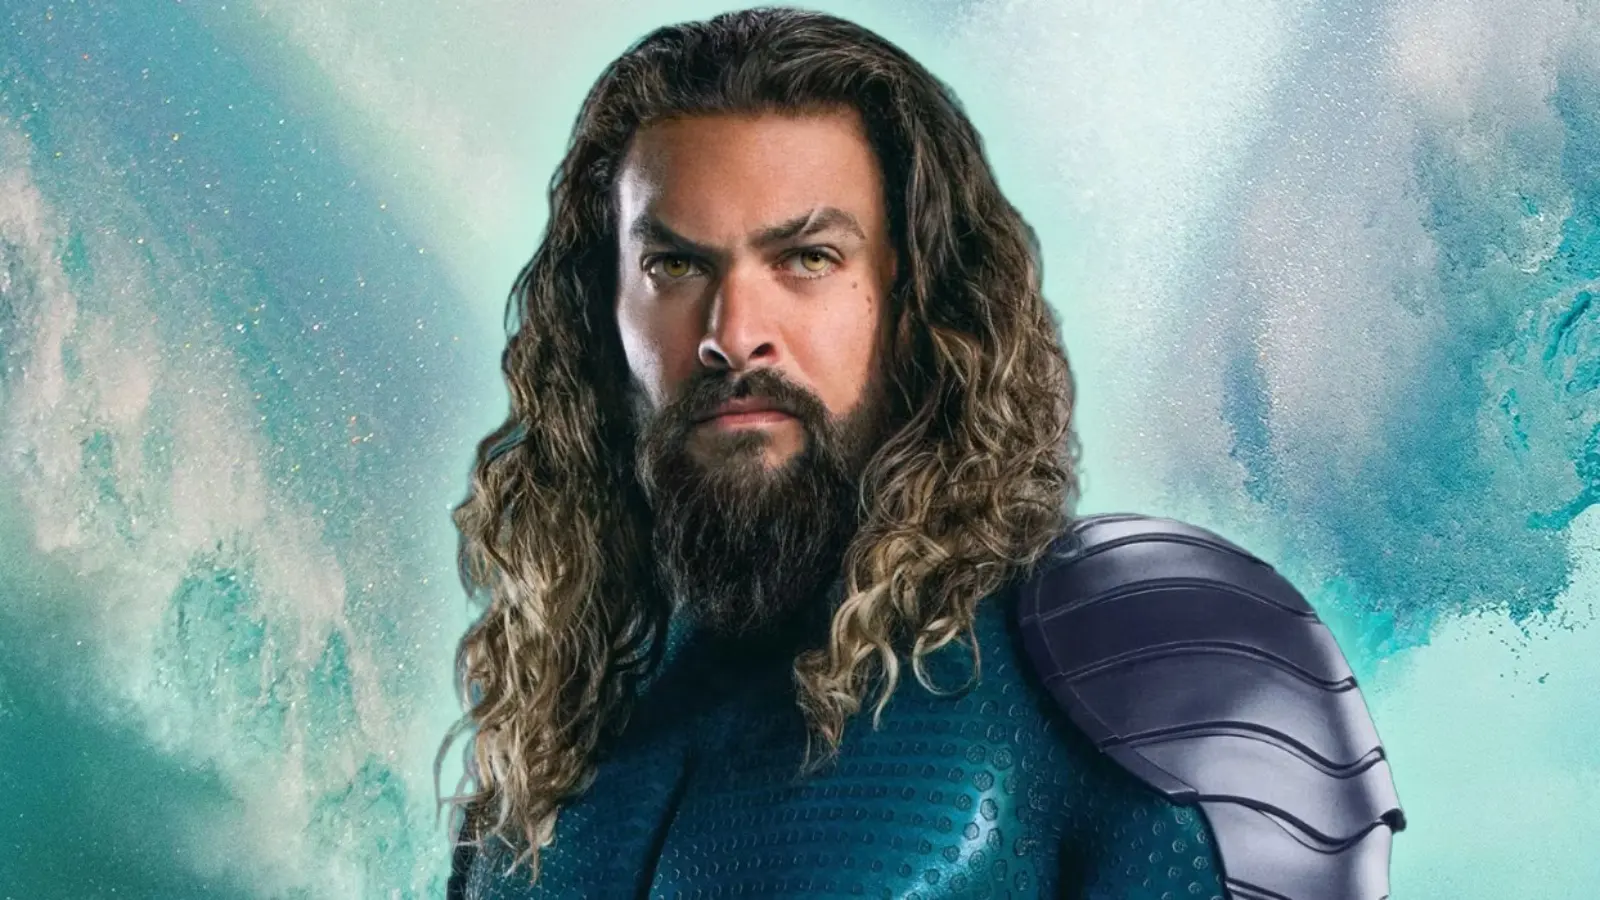 Aquaman's Sequel Faces Box Office Hurdle Will It Sink or Swim in the DCEU's Final Chapter